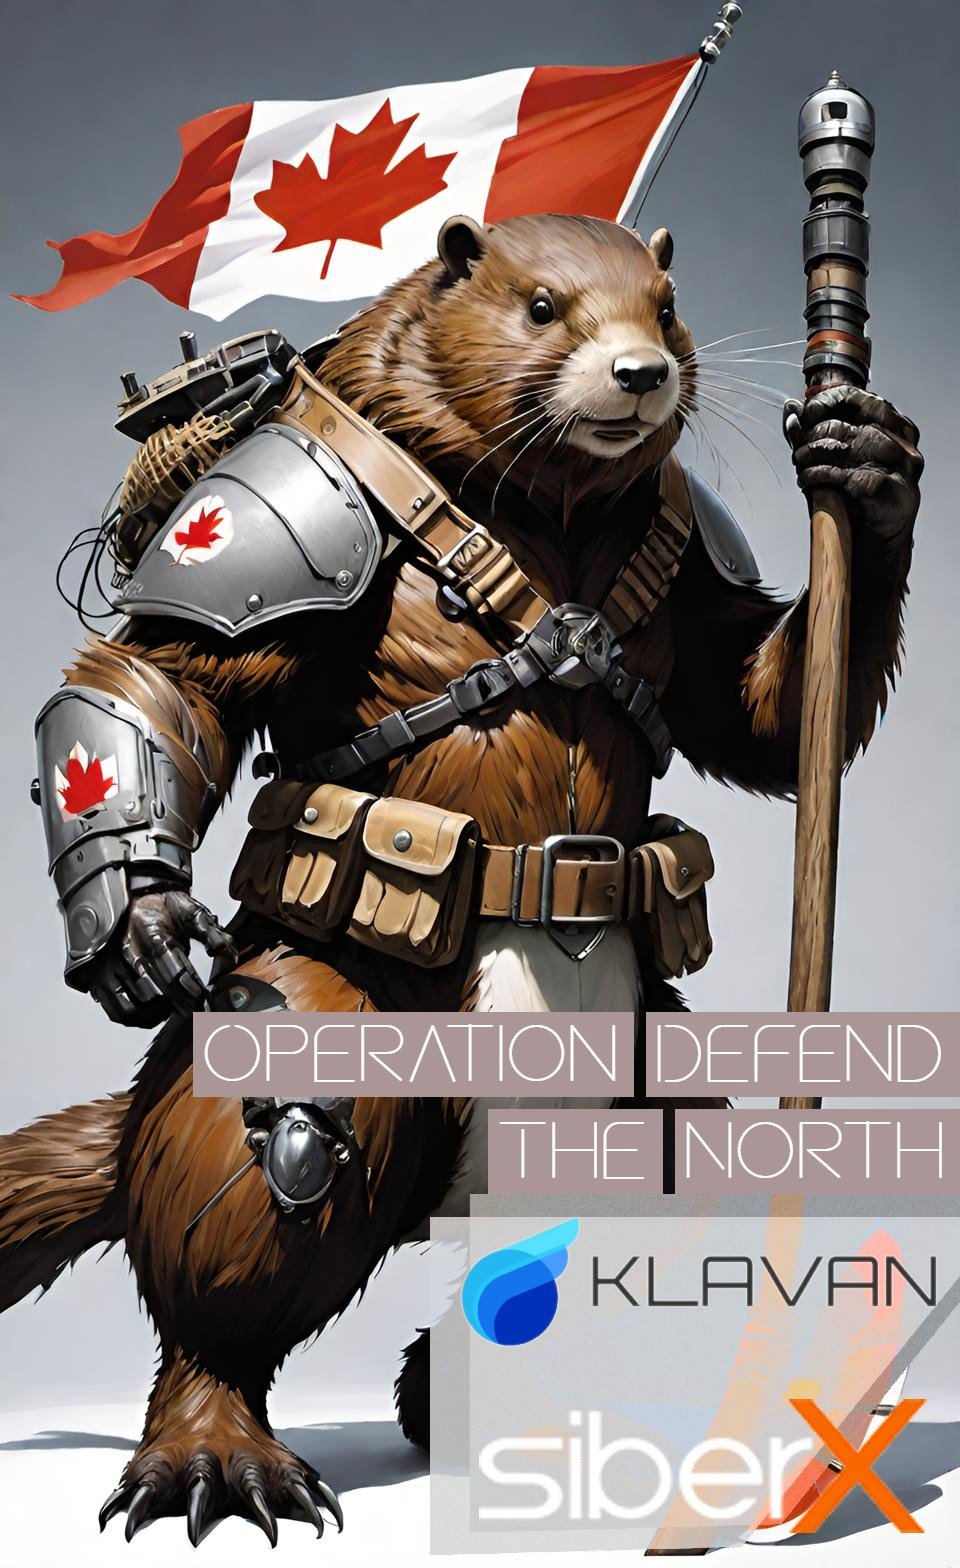 Operation Defend the North - A Canadian Cybersecurity Readiness Exercise